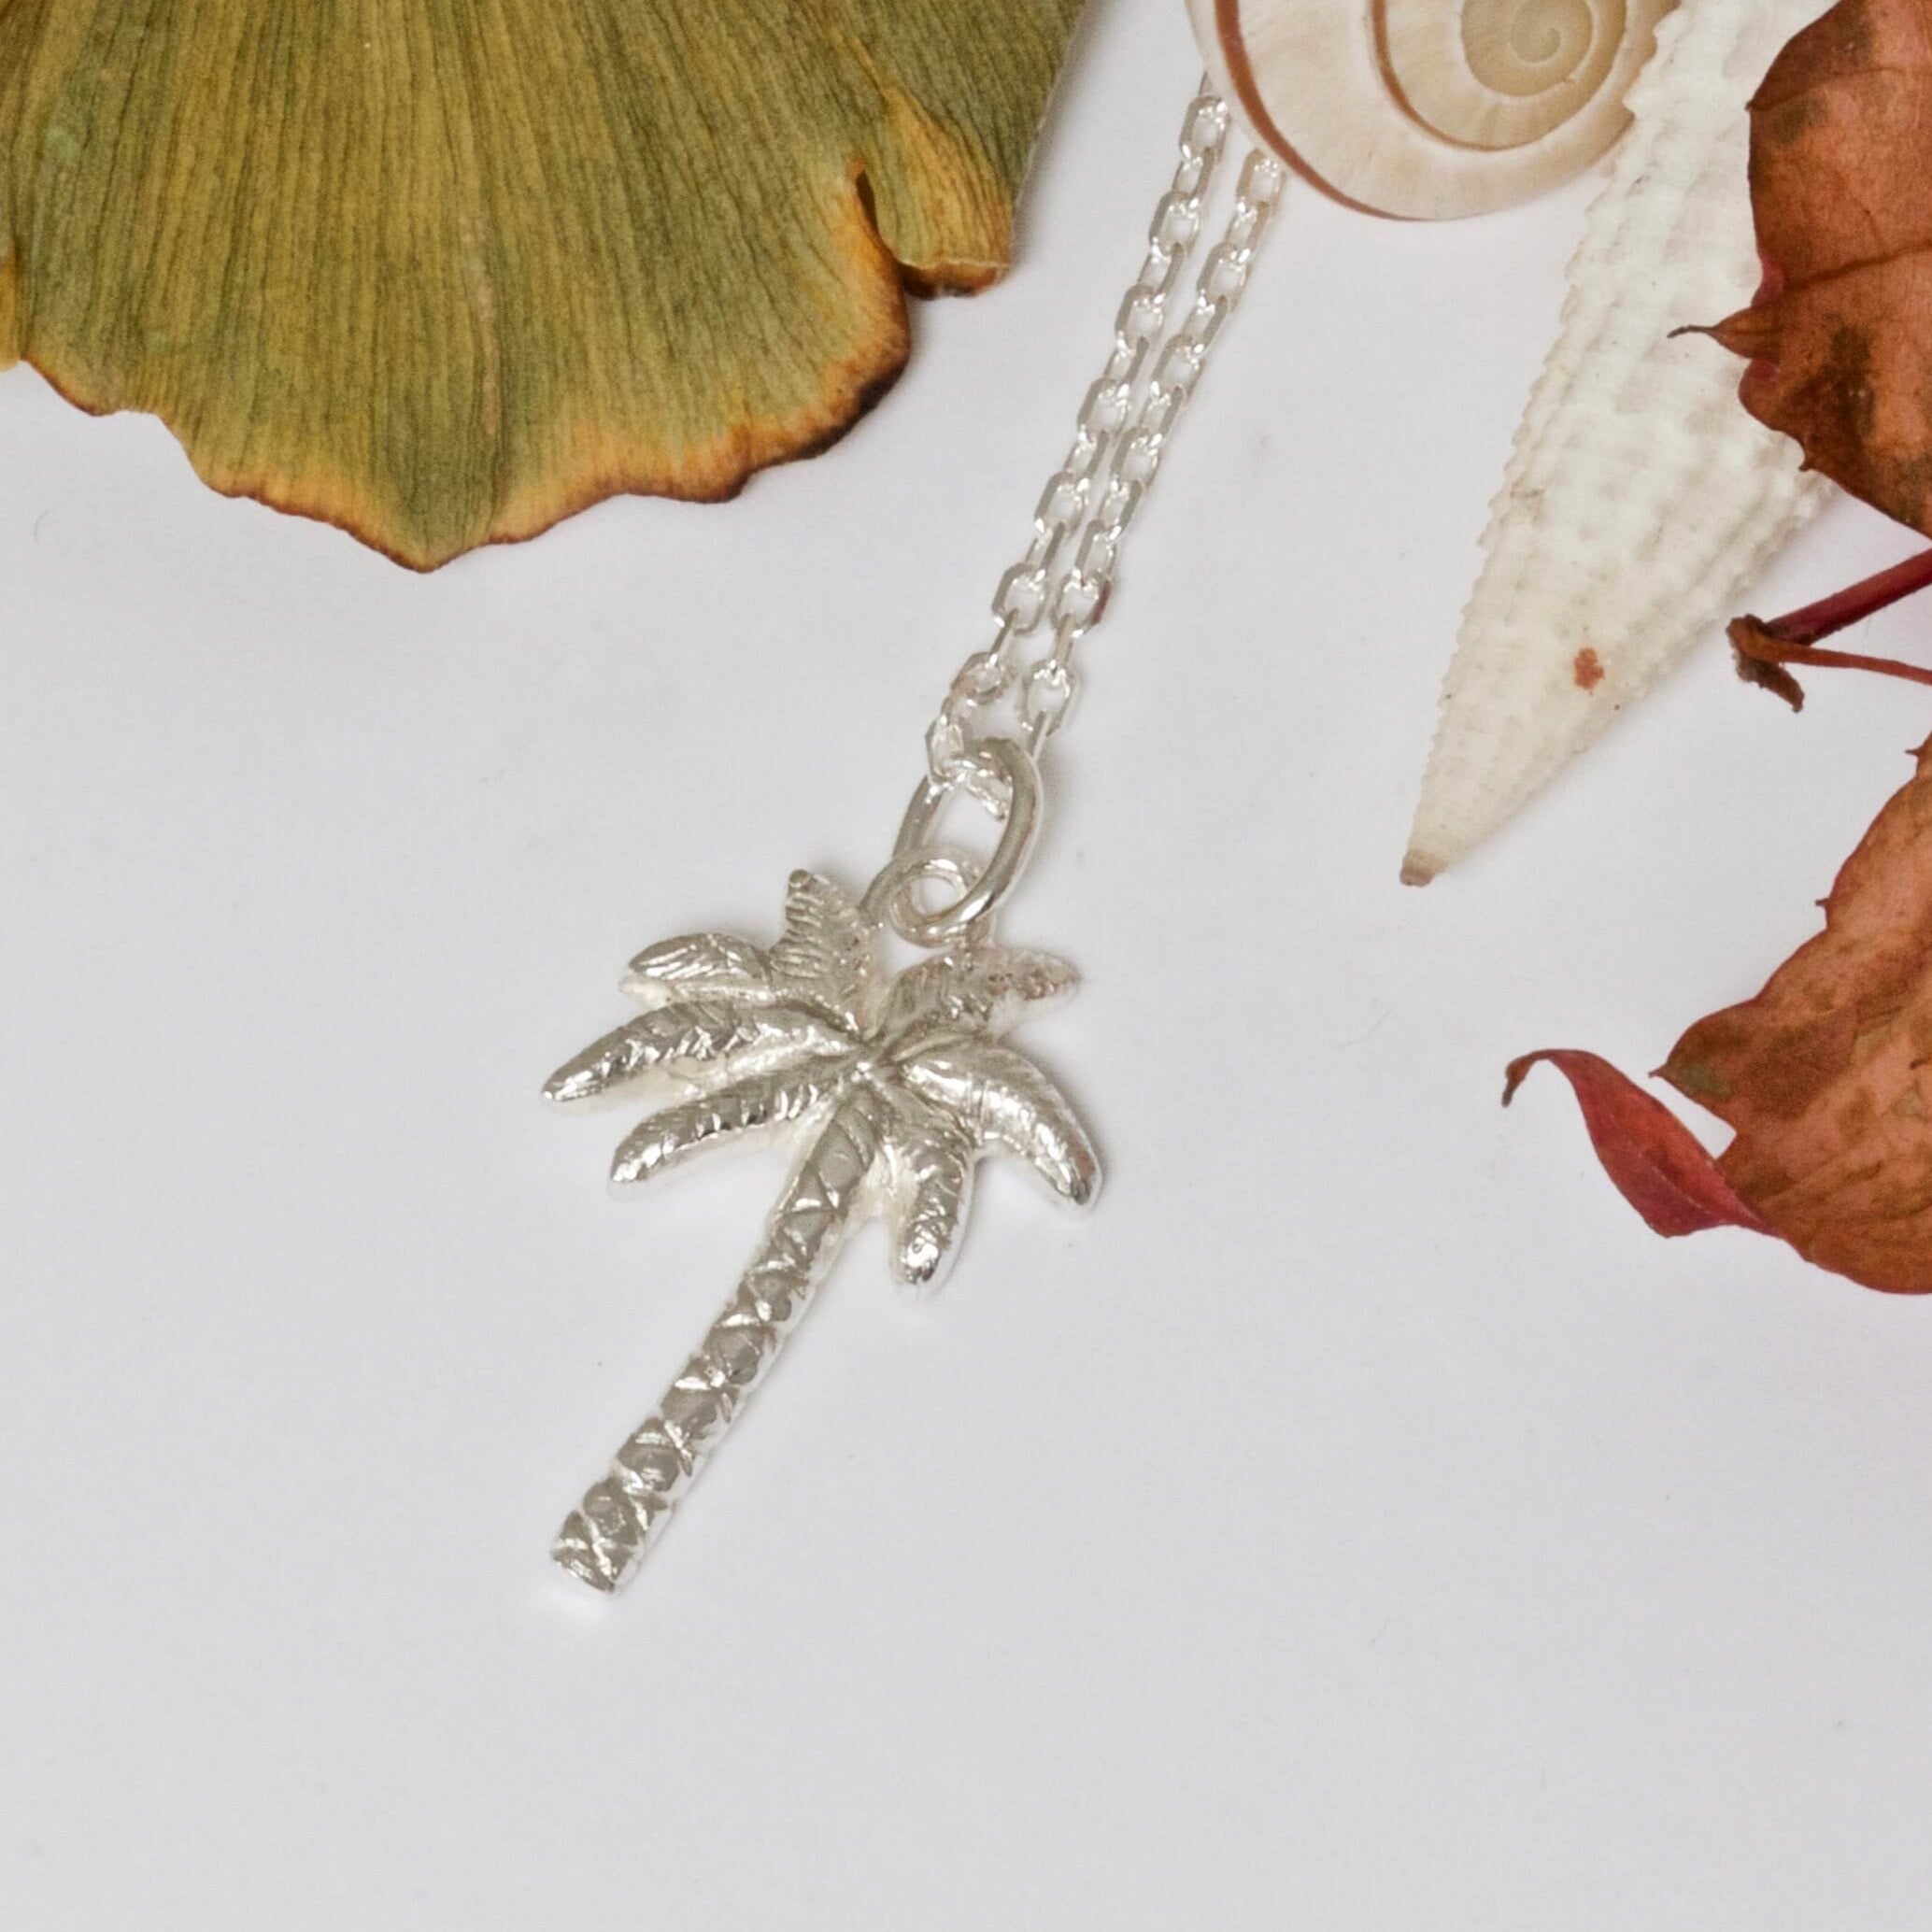 Palm Tree Crew Women's Necklace Silver